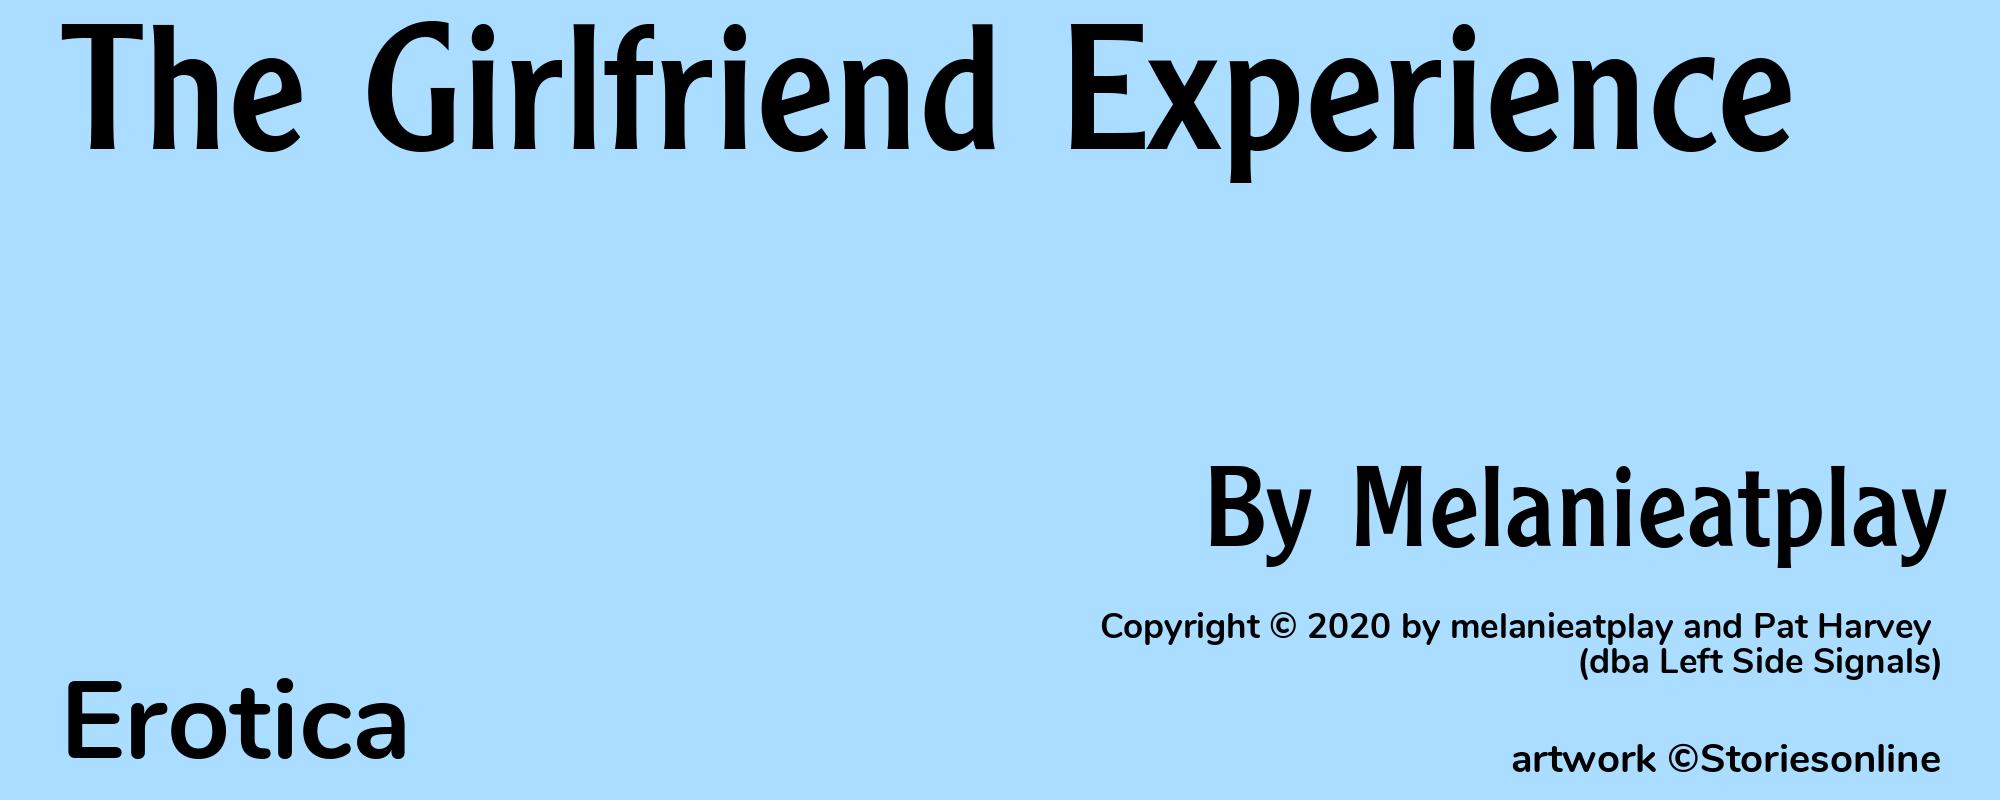 The Girlfriend Experience - Cover